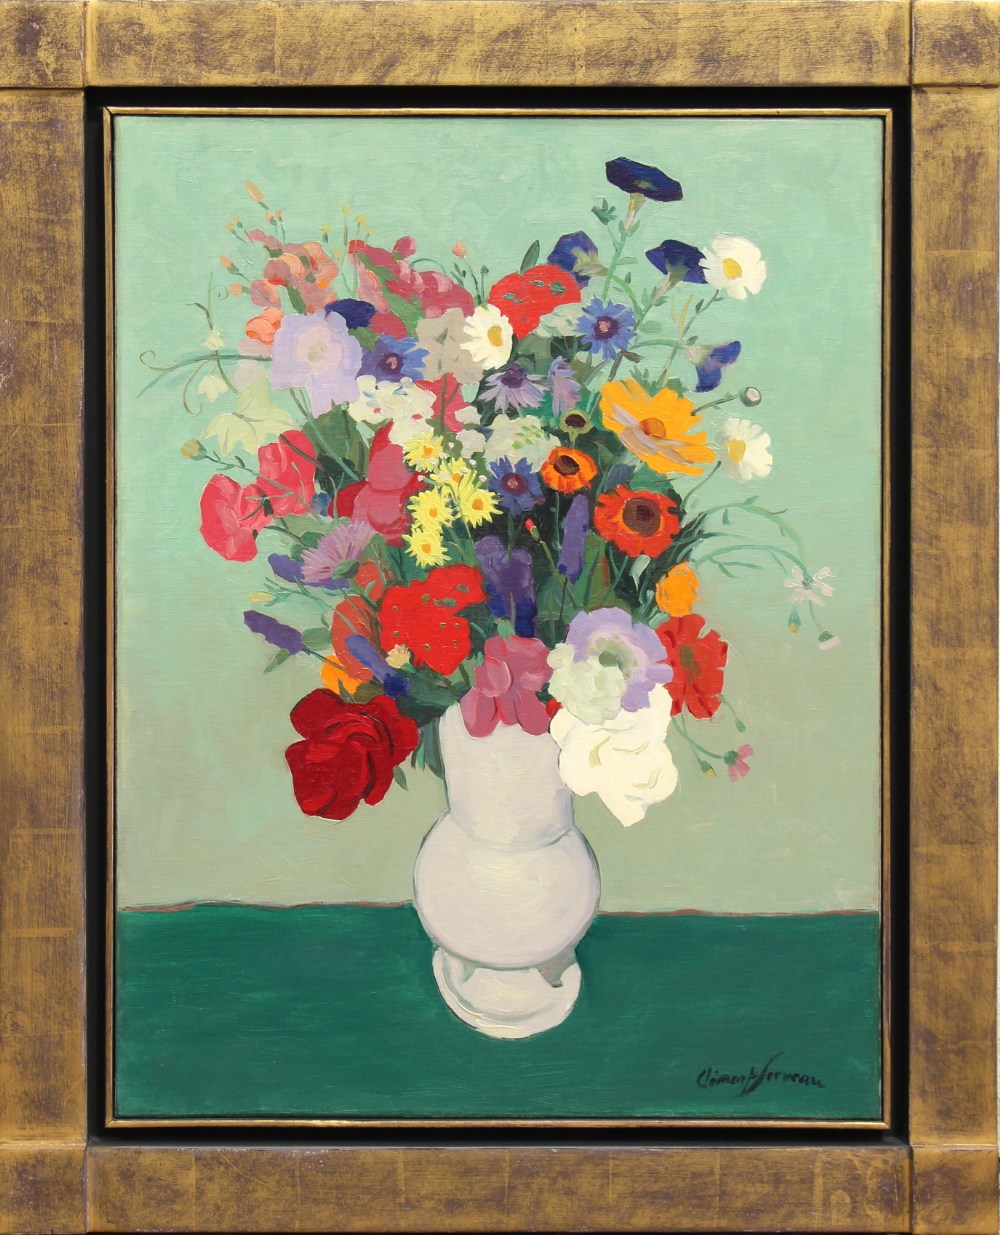 ARR - Clement Serveau (1886-1972) - STILL LIFE OF SUMMER FLOWERS IN A VASE - oil on canvas, 28.55 by